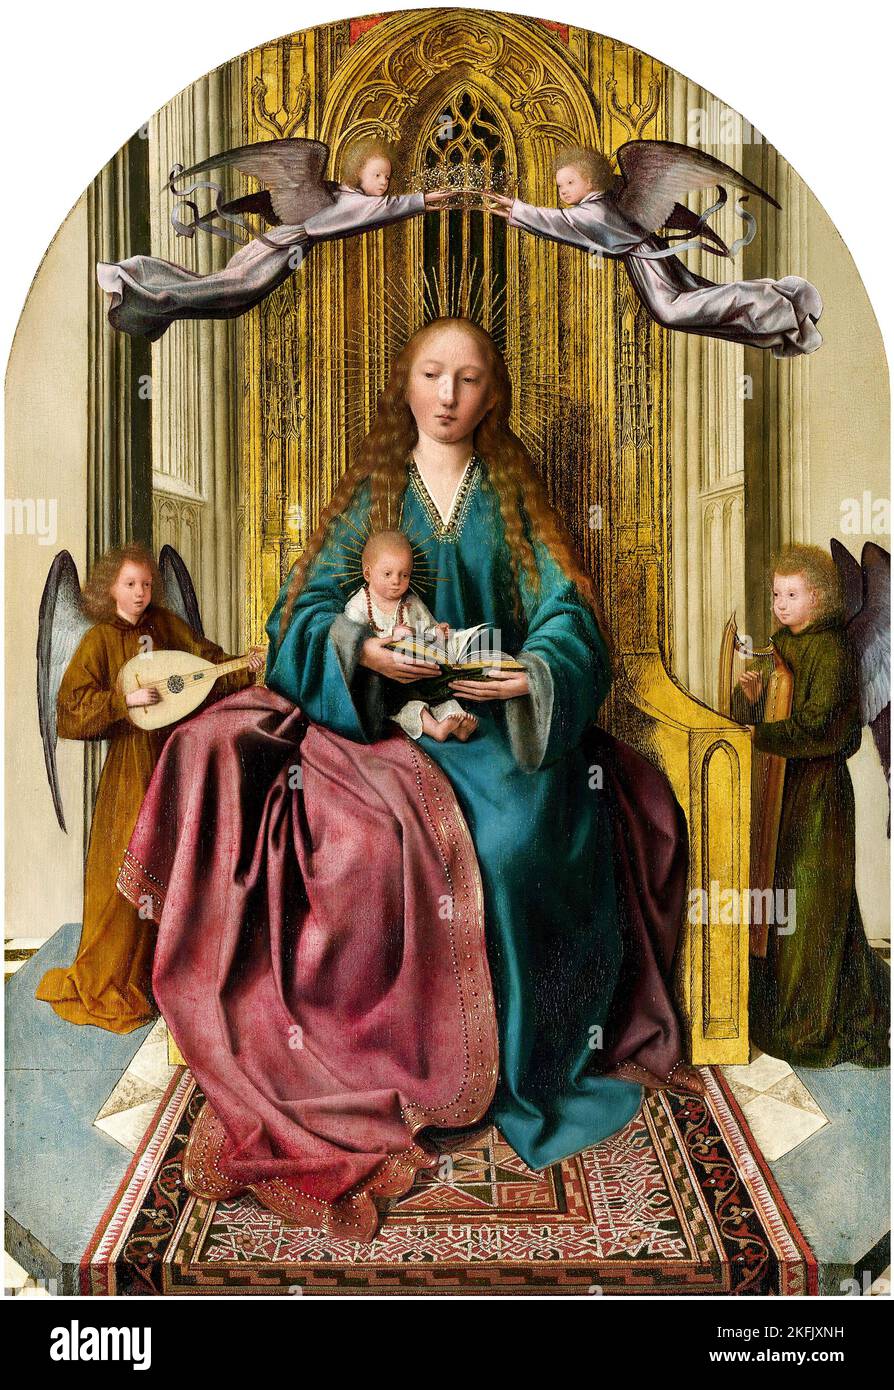 Quinten Metsys; The Virgin and Child Enthroned, with Four Angels; Circa 1493-1497; Oil on wood; National Gallery, London, UK. Stock Photo